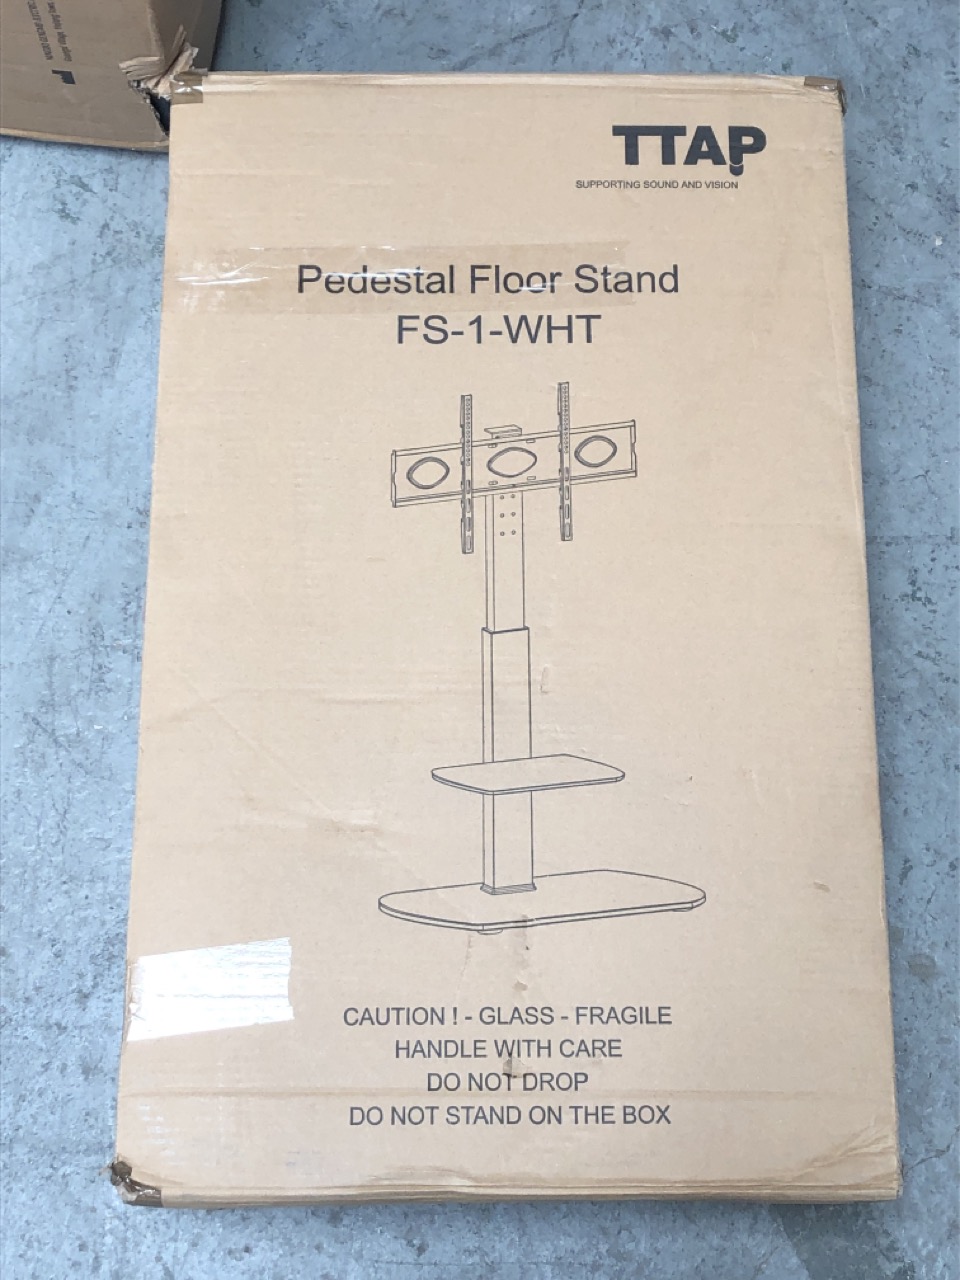 TTAP PEDESTAL FLOOR STAND FS-1-WHT (COLLECTION OR OPTIONAL DELIVERY)